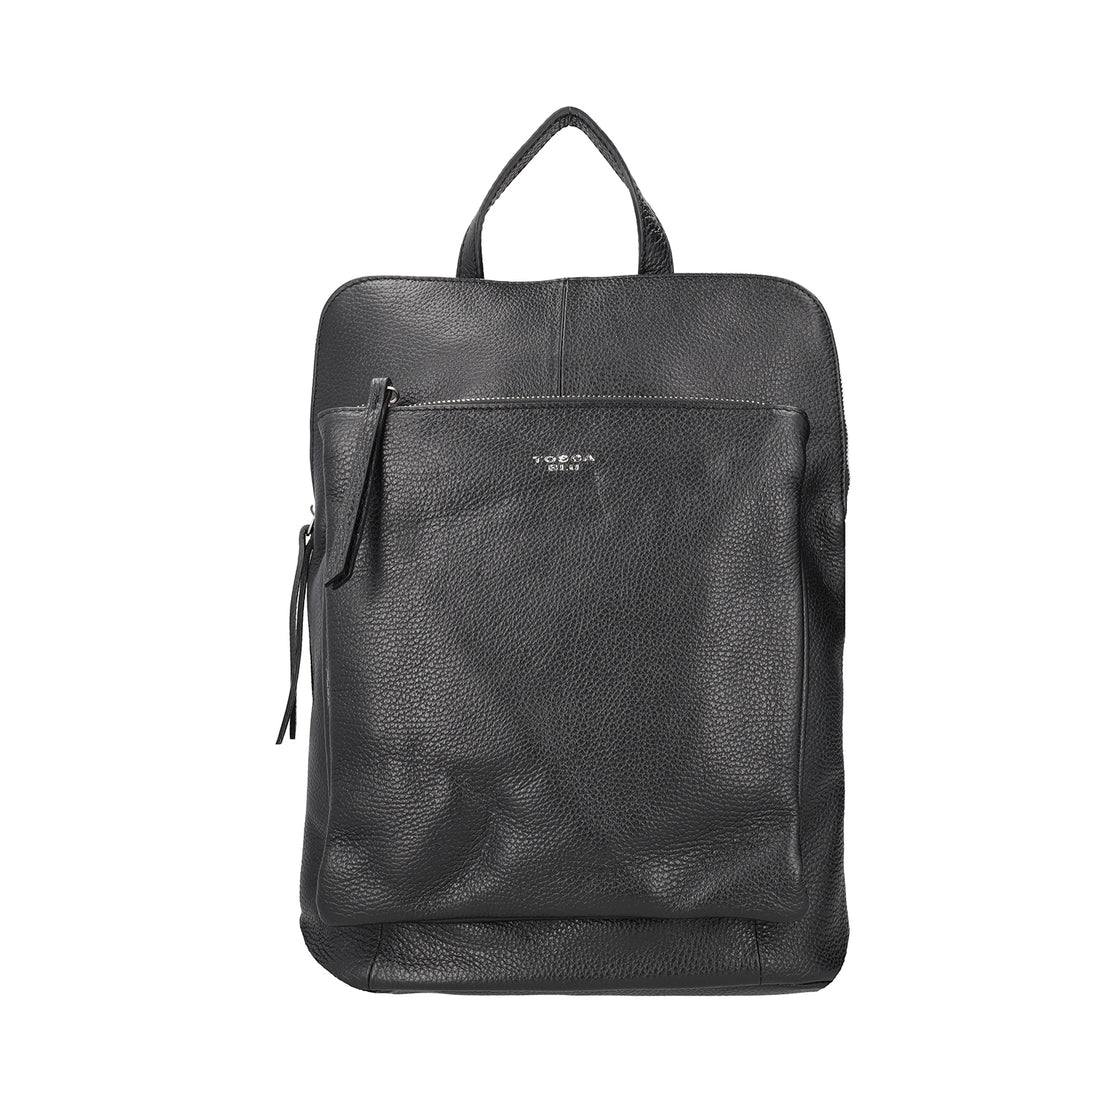 BLACK LEATHER BACKPACK WITH ZIPPER CLOSURE